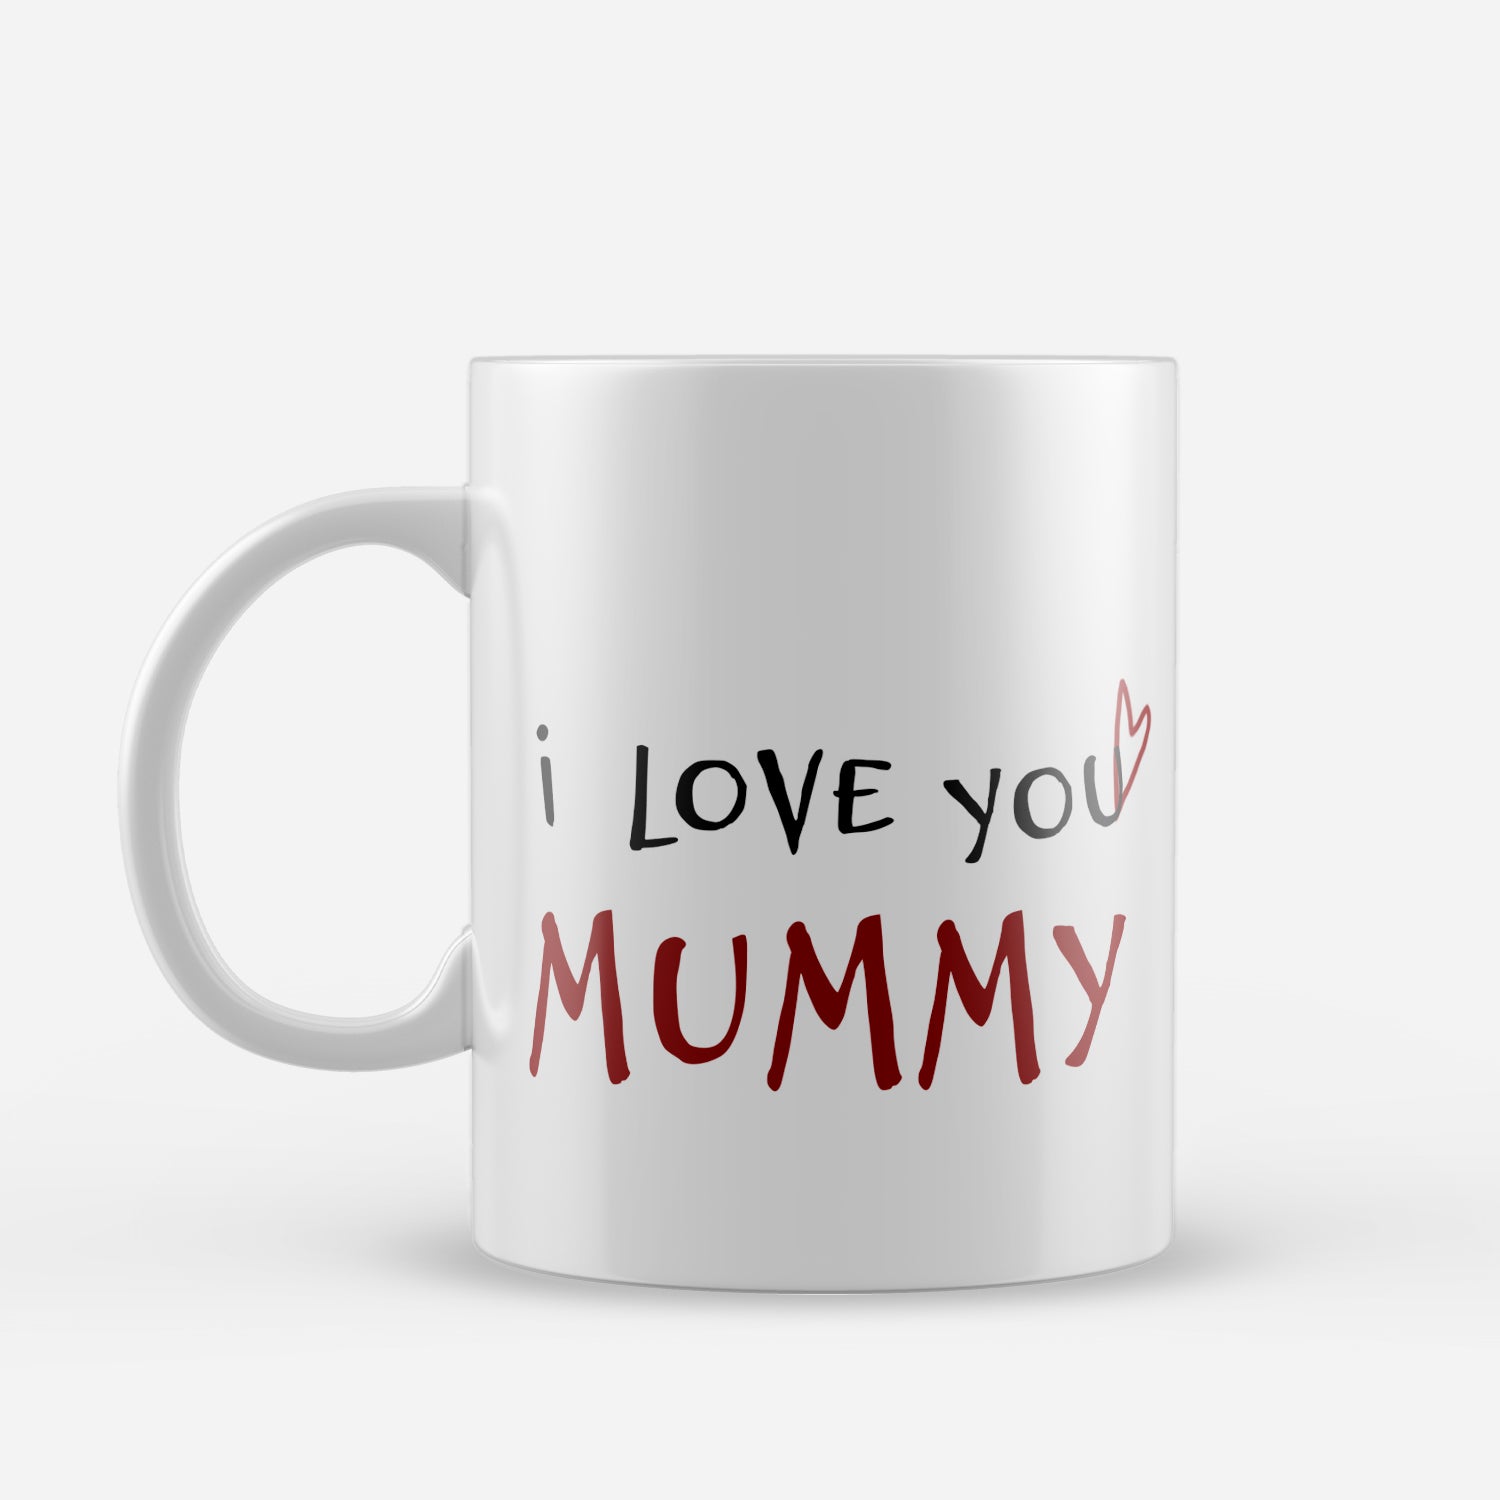 "I Love you Mommy" Mother's Day theme Ceramic Coffee Mugs 2